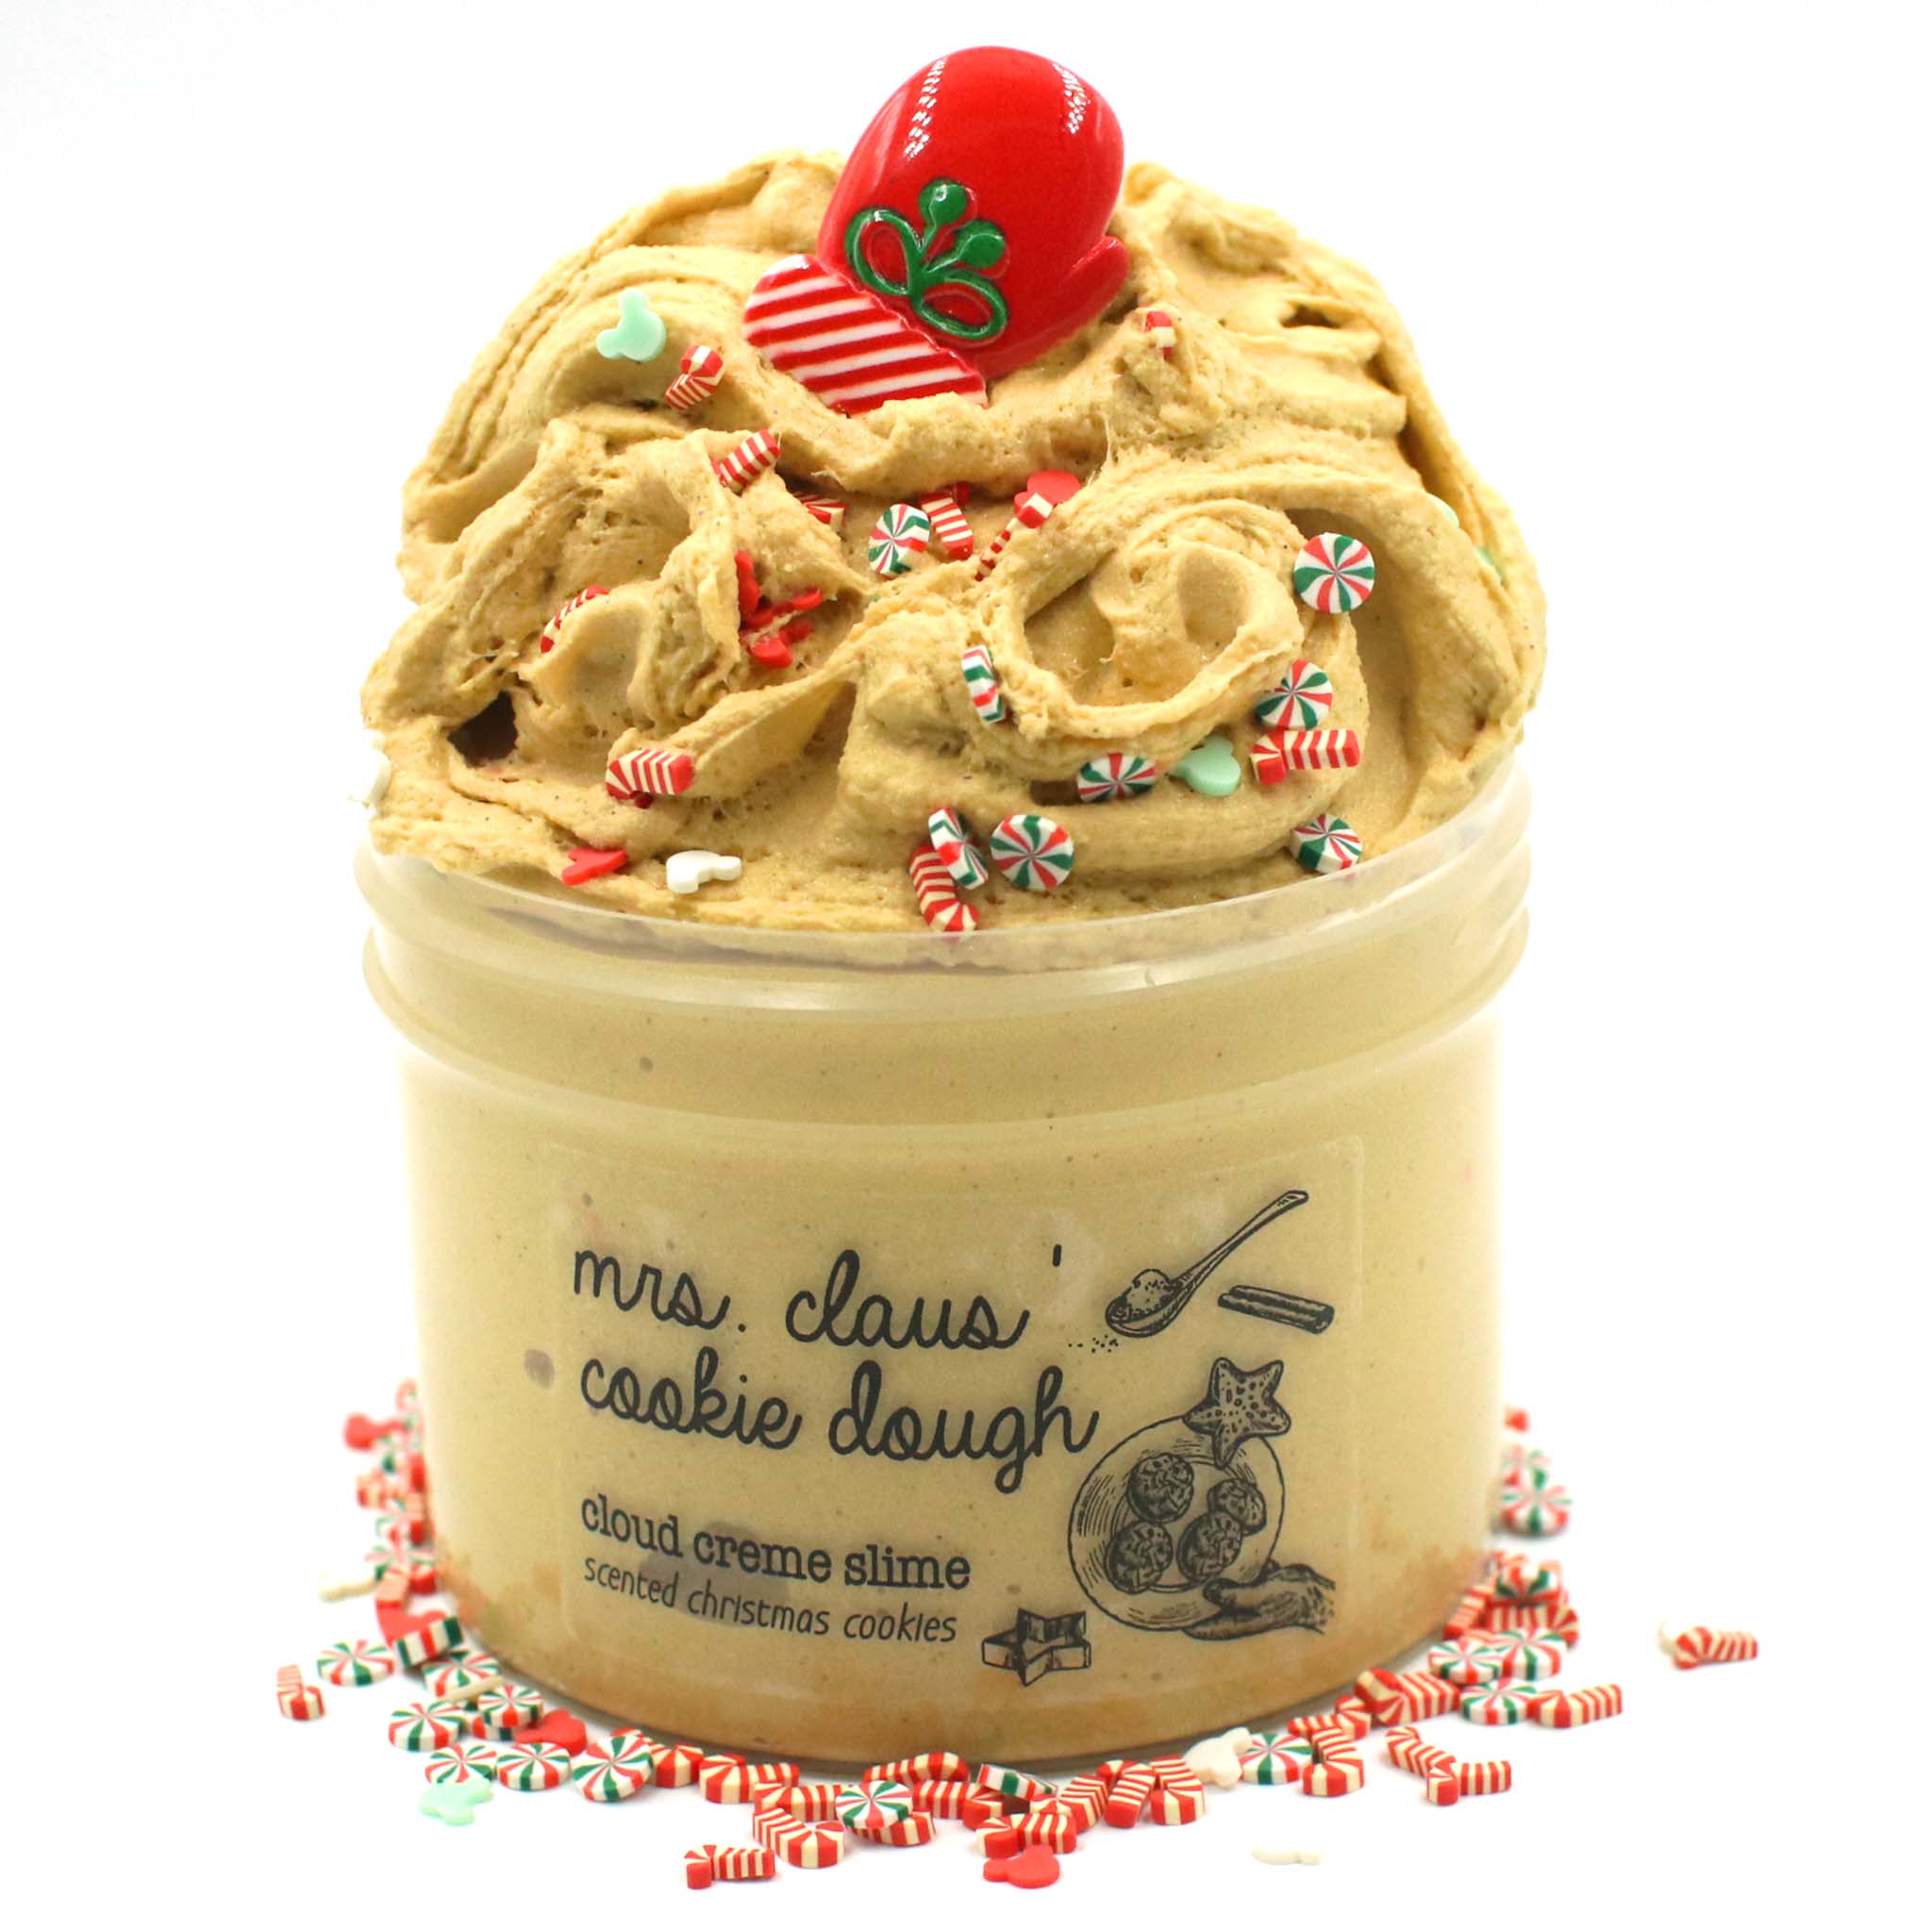 Mrs Claus Cookie Dough Christmas Slime Gift For Kids Brown Cinnamon Bakery Scented Clay Creamy Cloud Cream Butter Snow Slime Fantasies Shop 9oz Front View